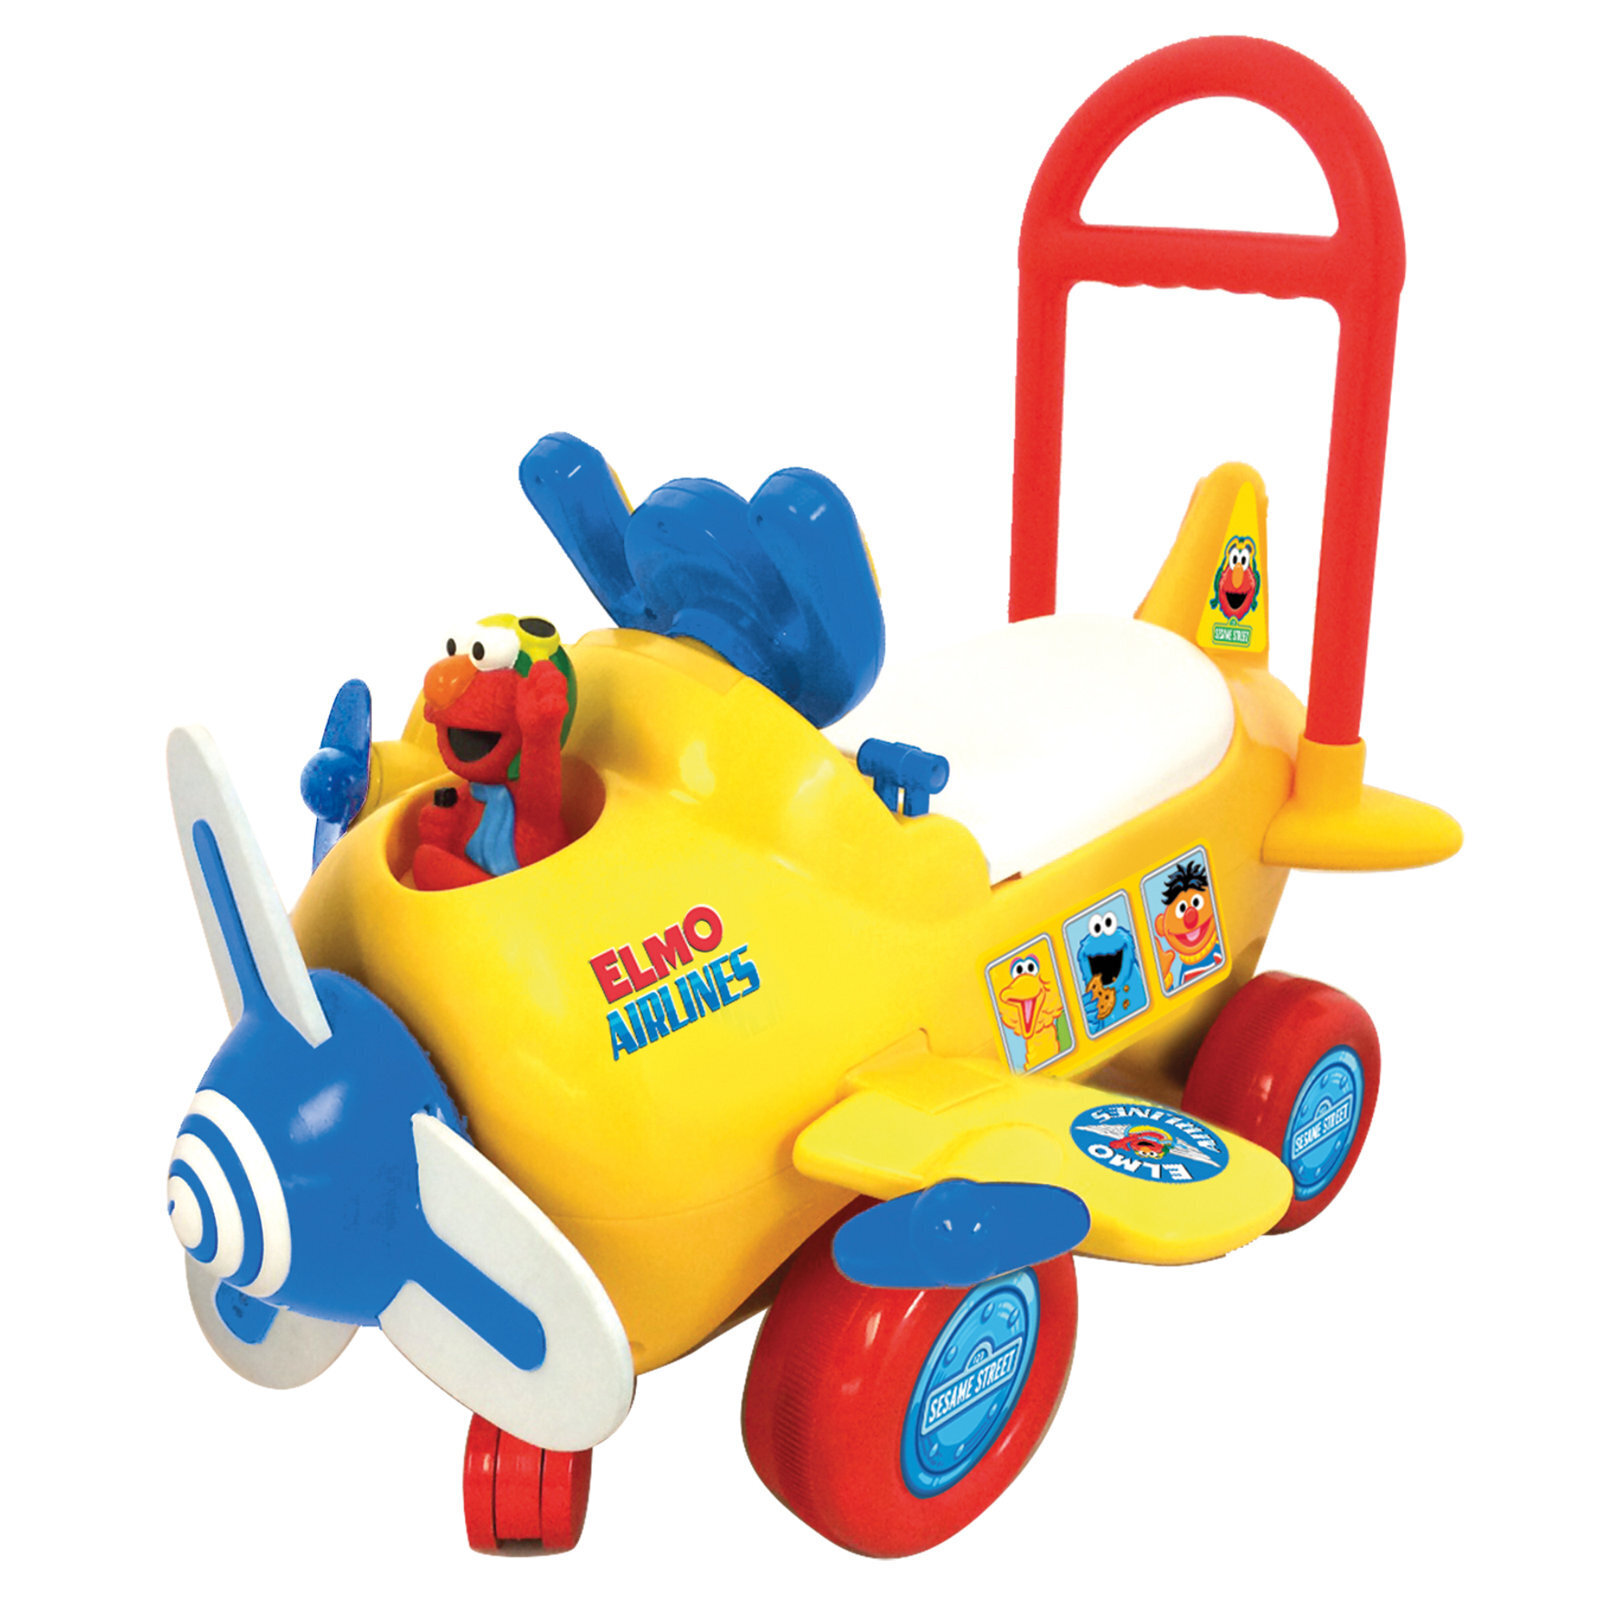 Sesame Street Pushable Airplane Ride On Toy